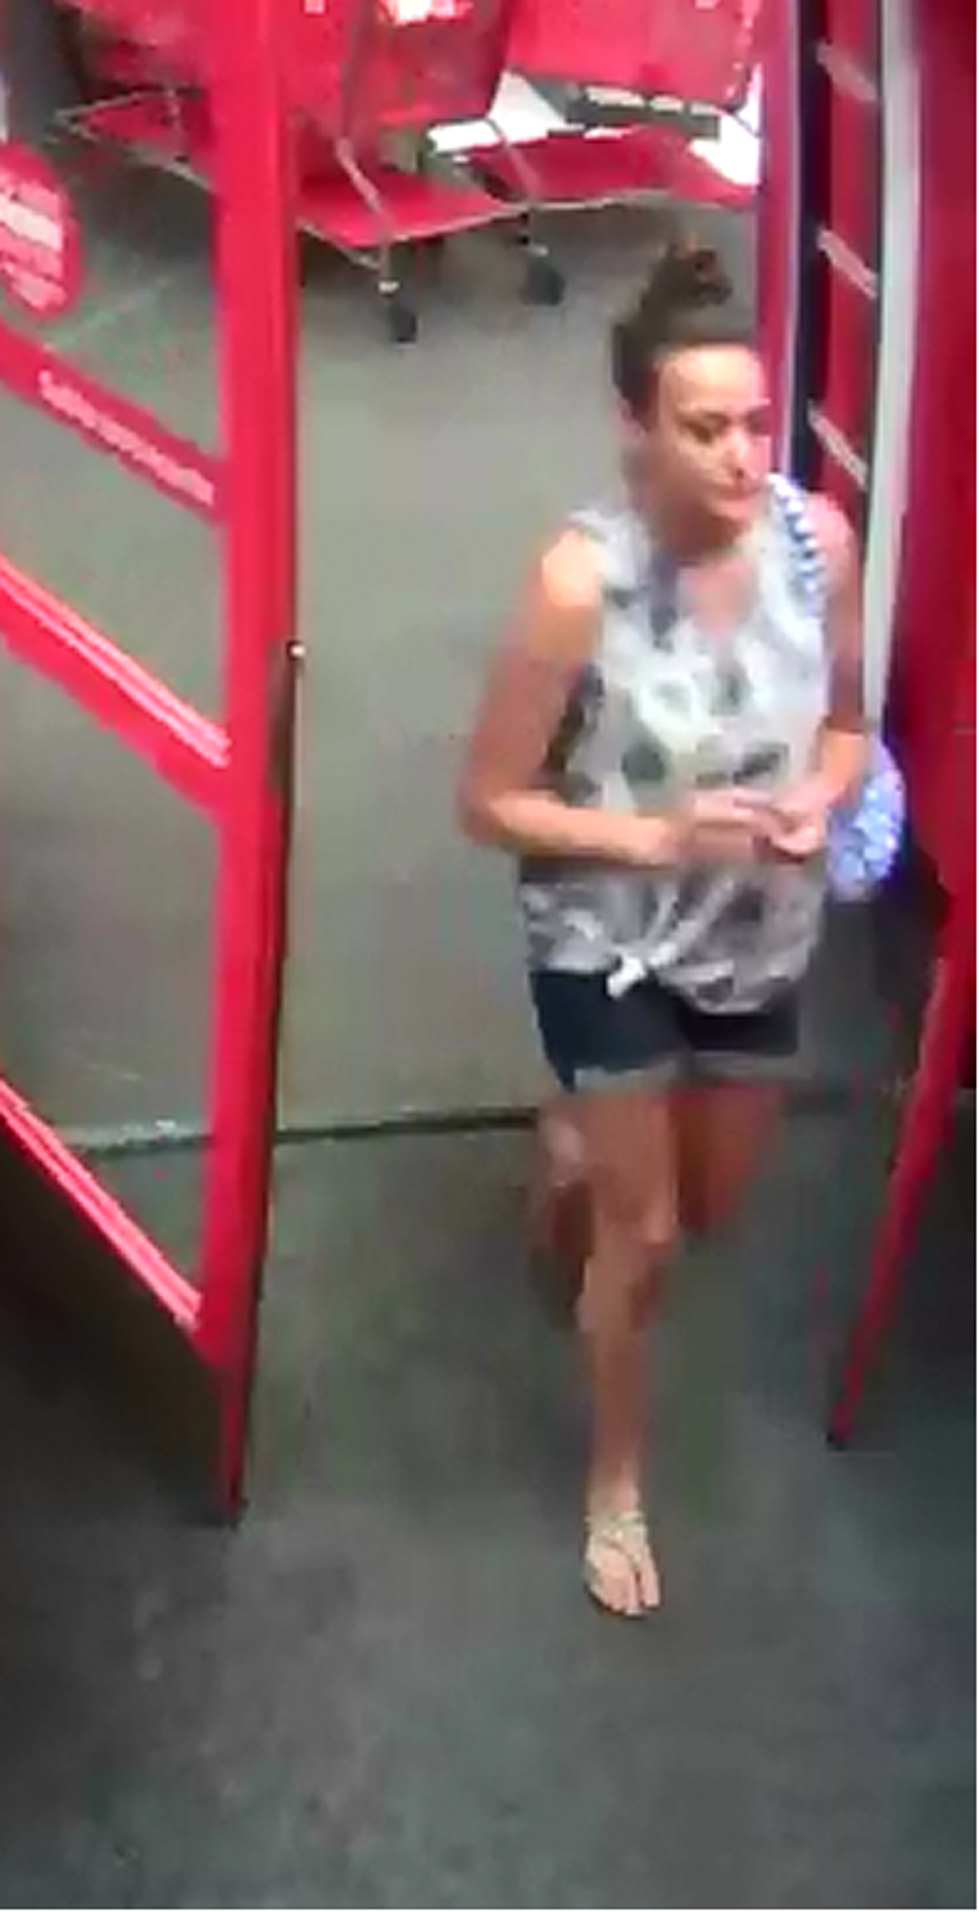 Can You Help Track Down This Shoplifter From Target?